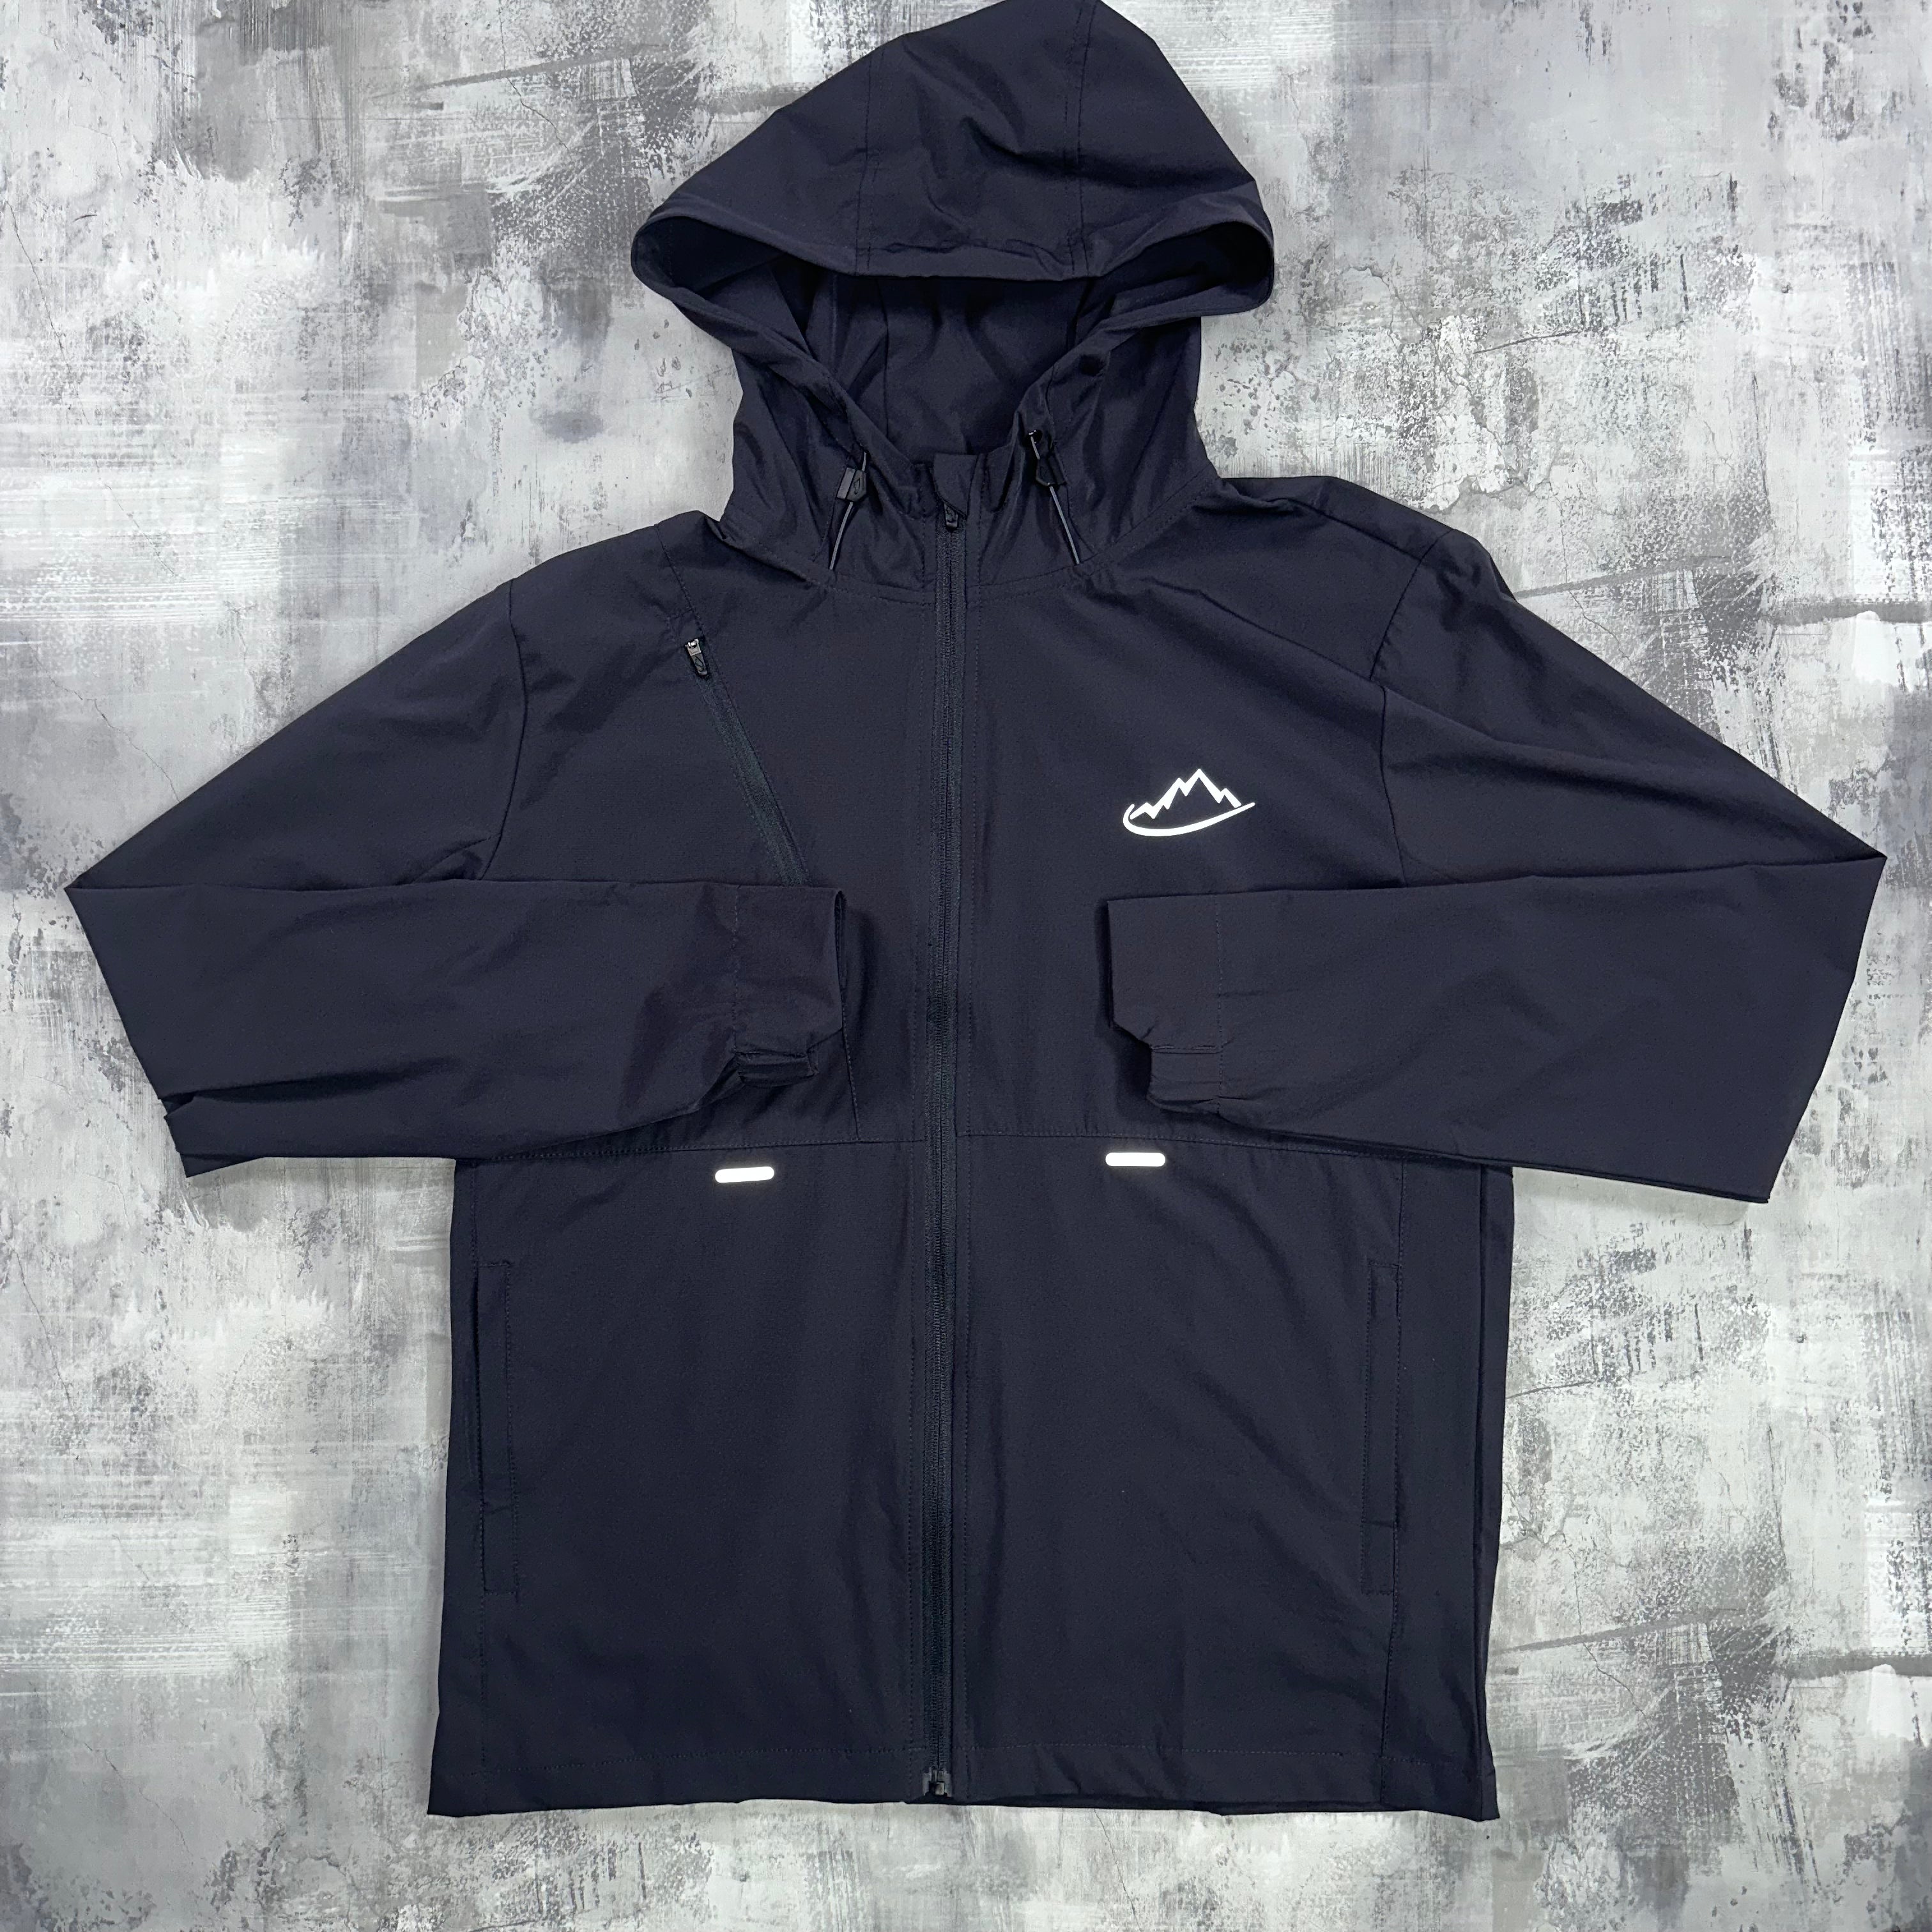 Adapt To Tracer jacket Grey